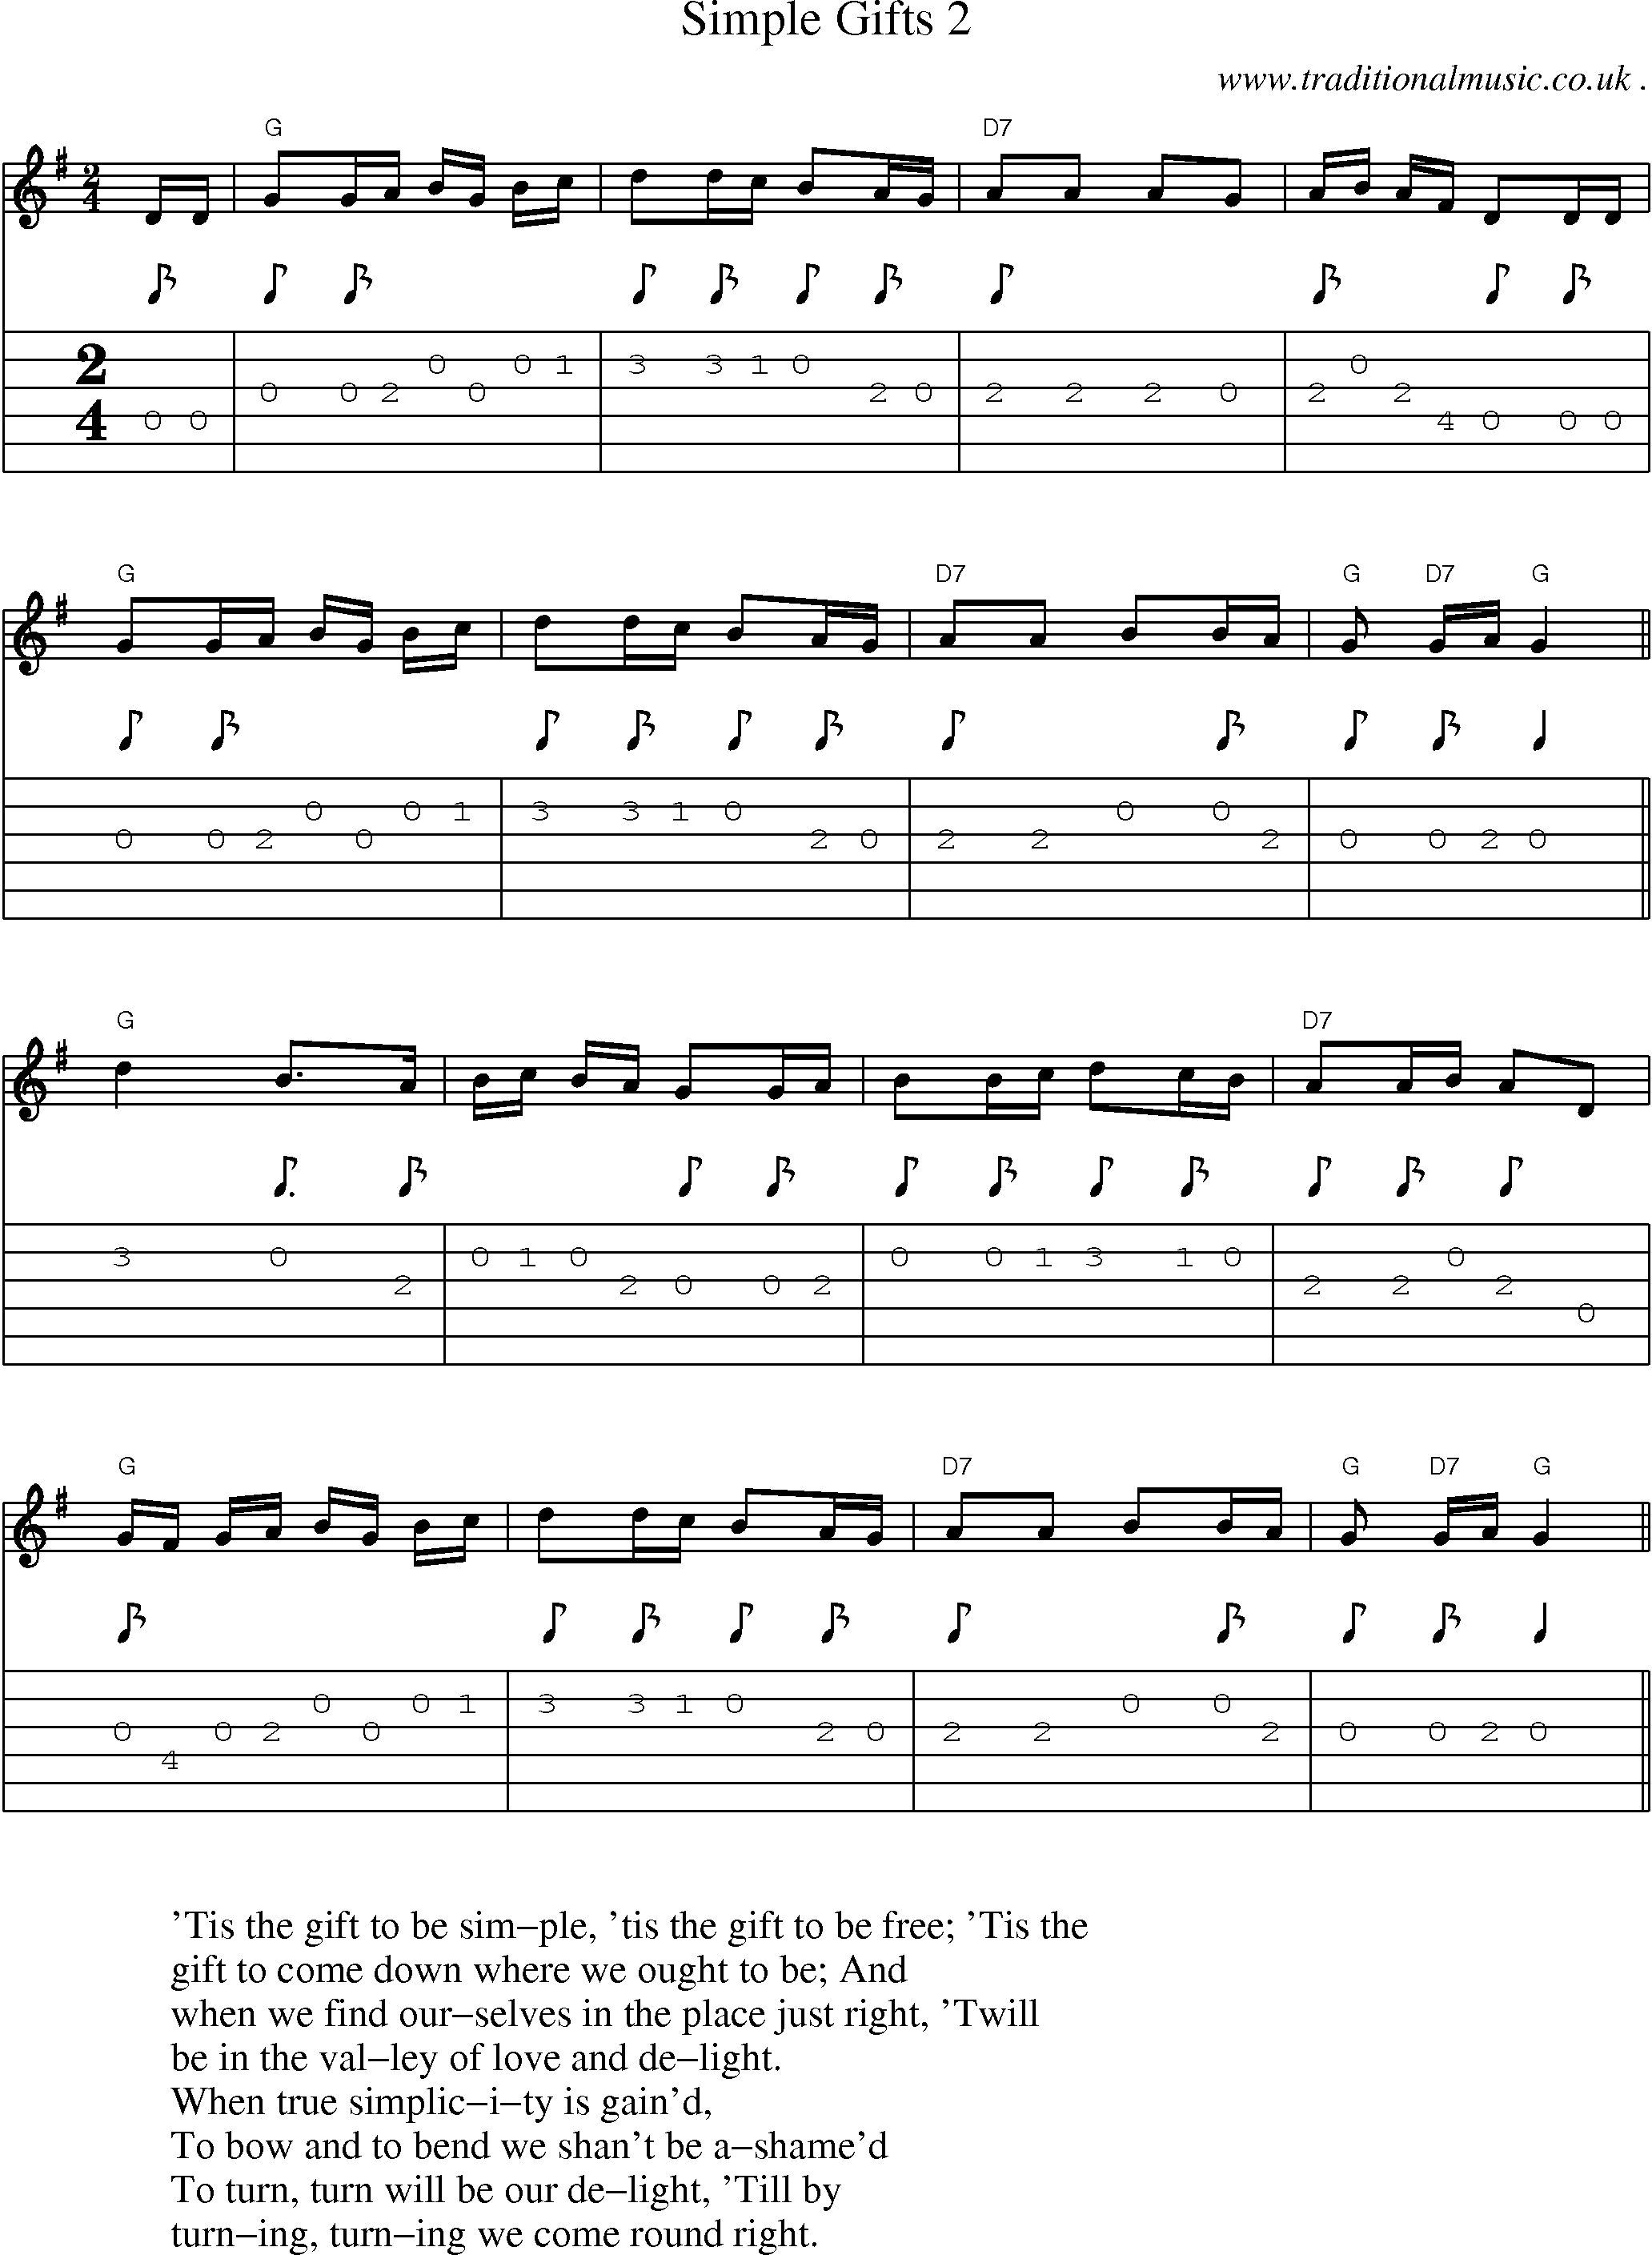 Music Score and Guitar Tabs for Simple Gifts 2